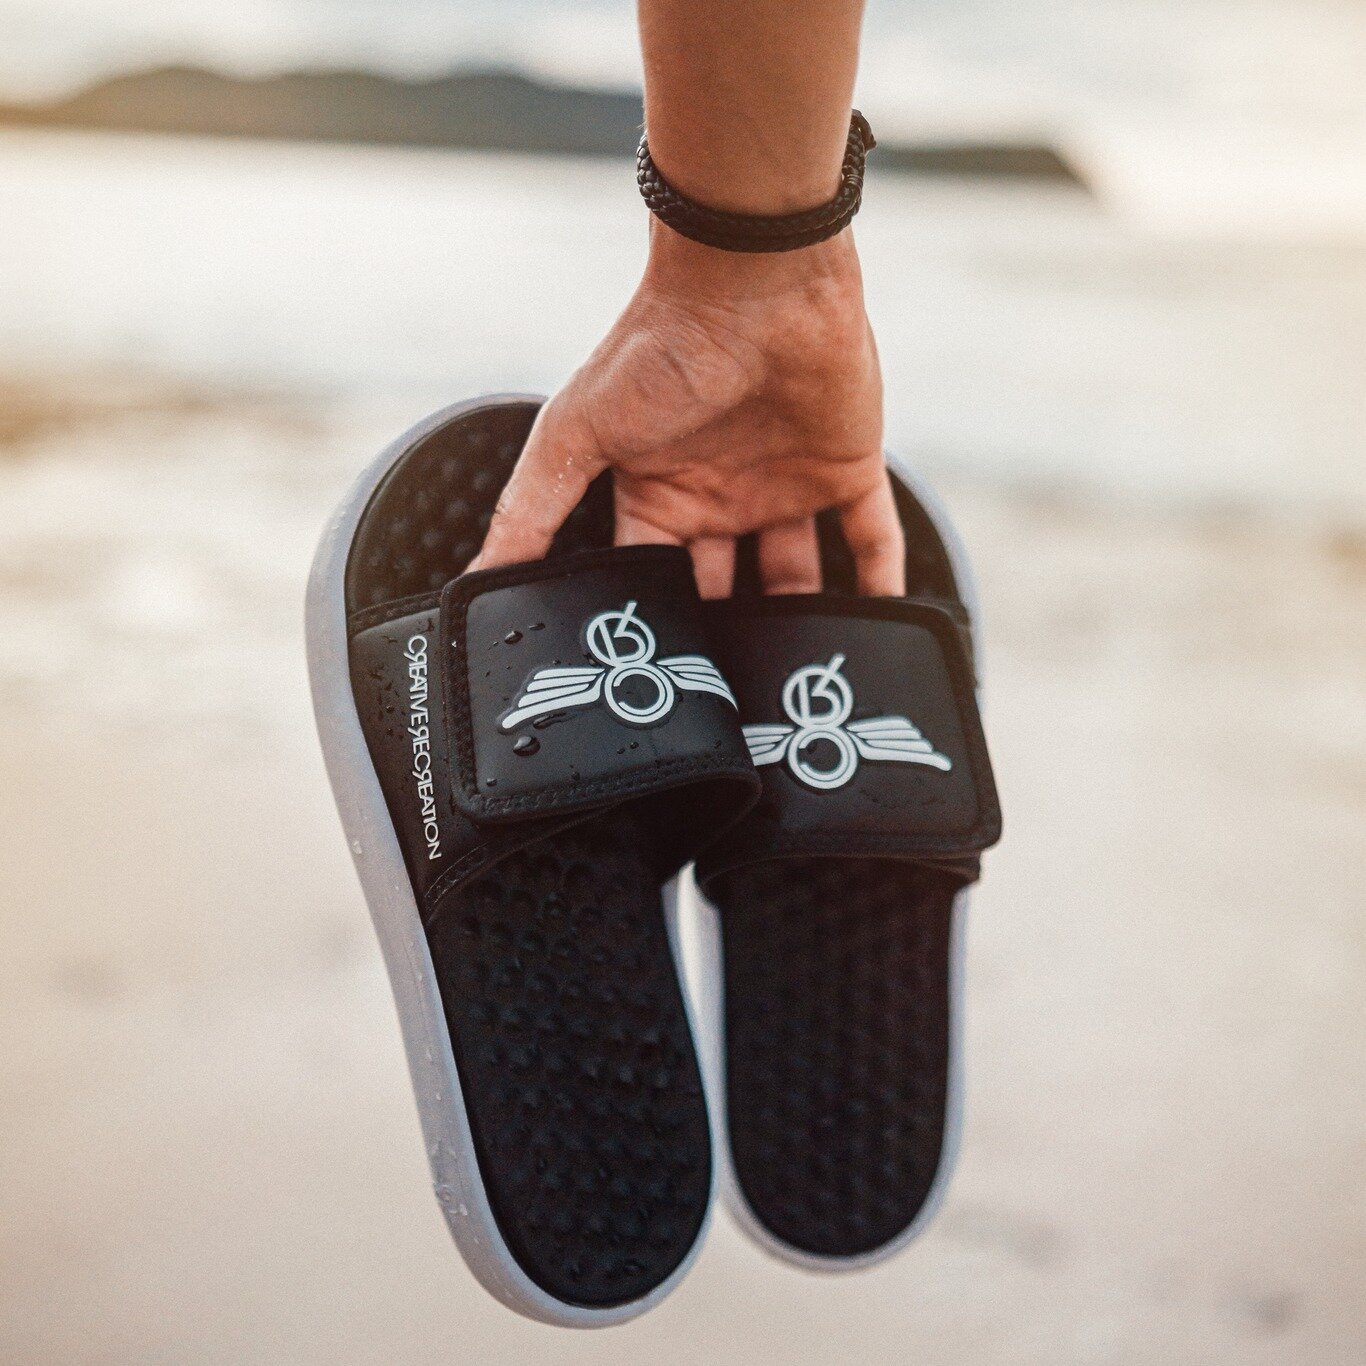 A closer look at our Varese Slide.  Comfort with style, the go to for a day at the beach. 

#comingsoon #slides #mensslides #mensfootwear #mensfashion #sliders #sliderdesign #shoes #style #styleinspo #fashion #fashionstyle